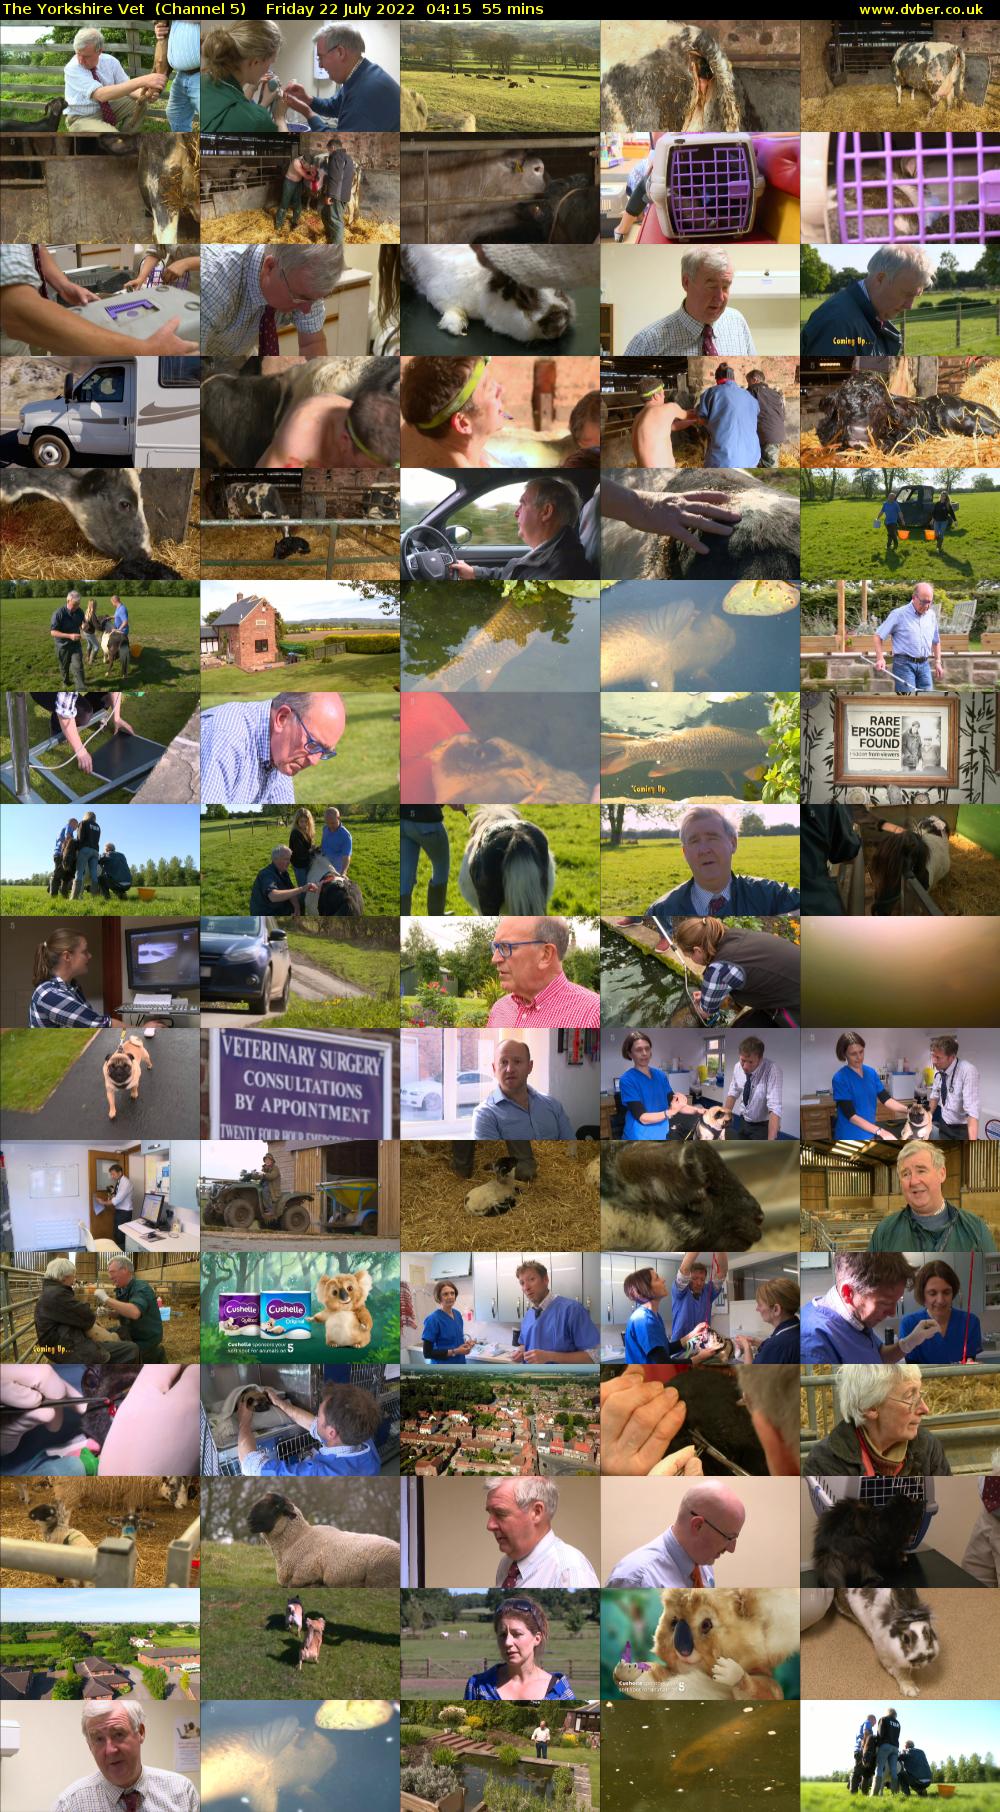 The Yorkshire Vet  (Channel 5) Friday 22 July 2022 04:15 - 05:10